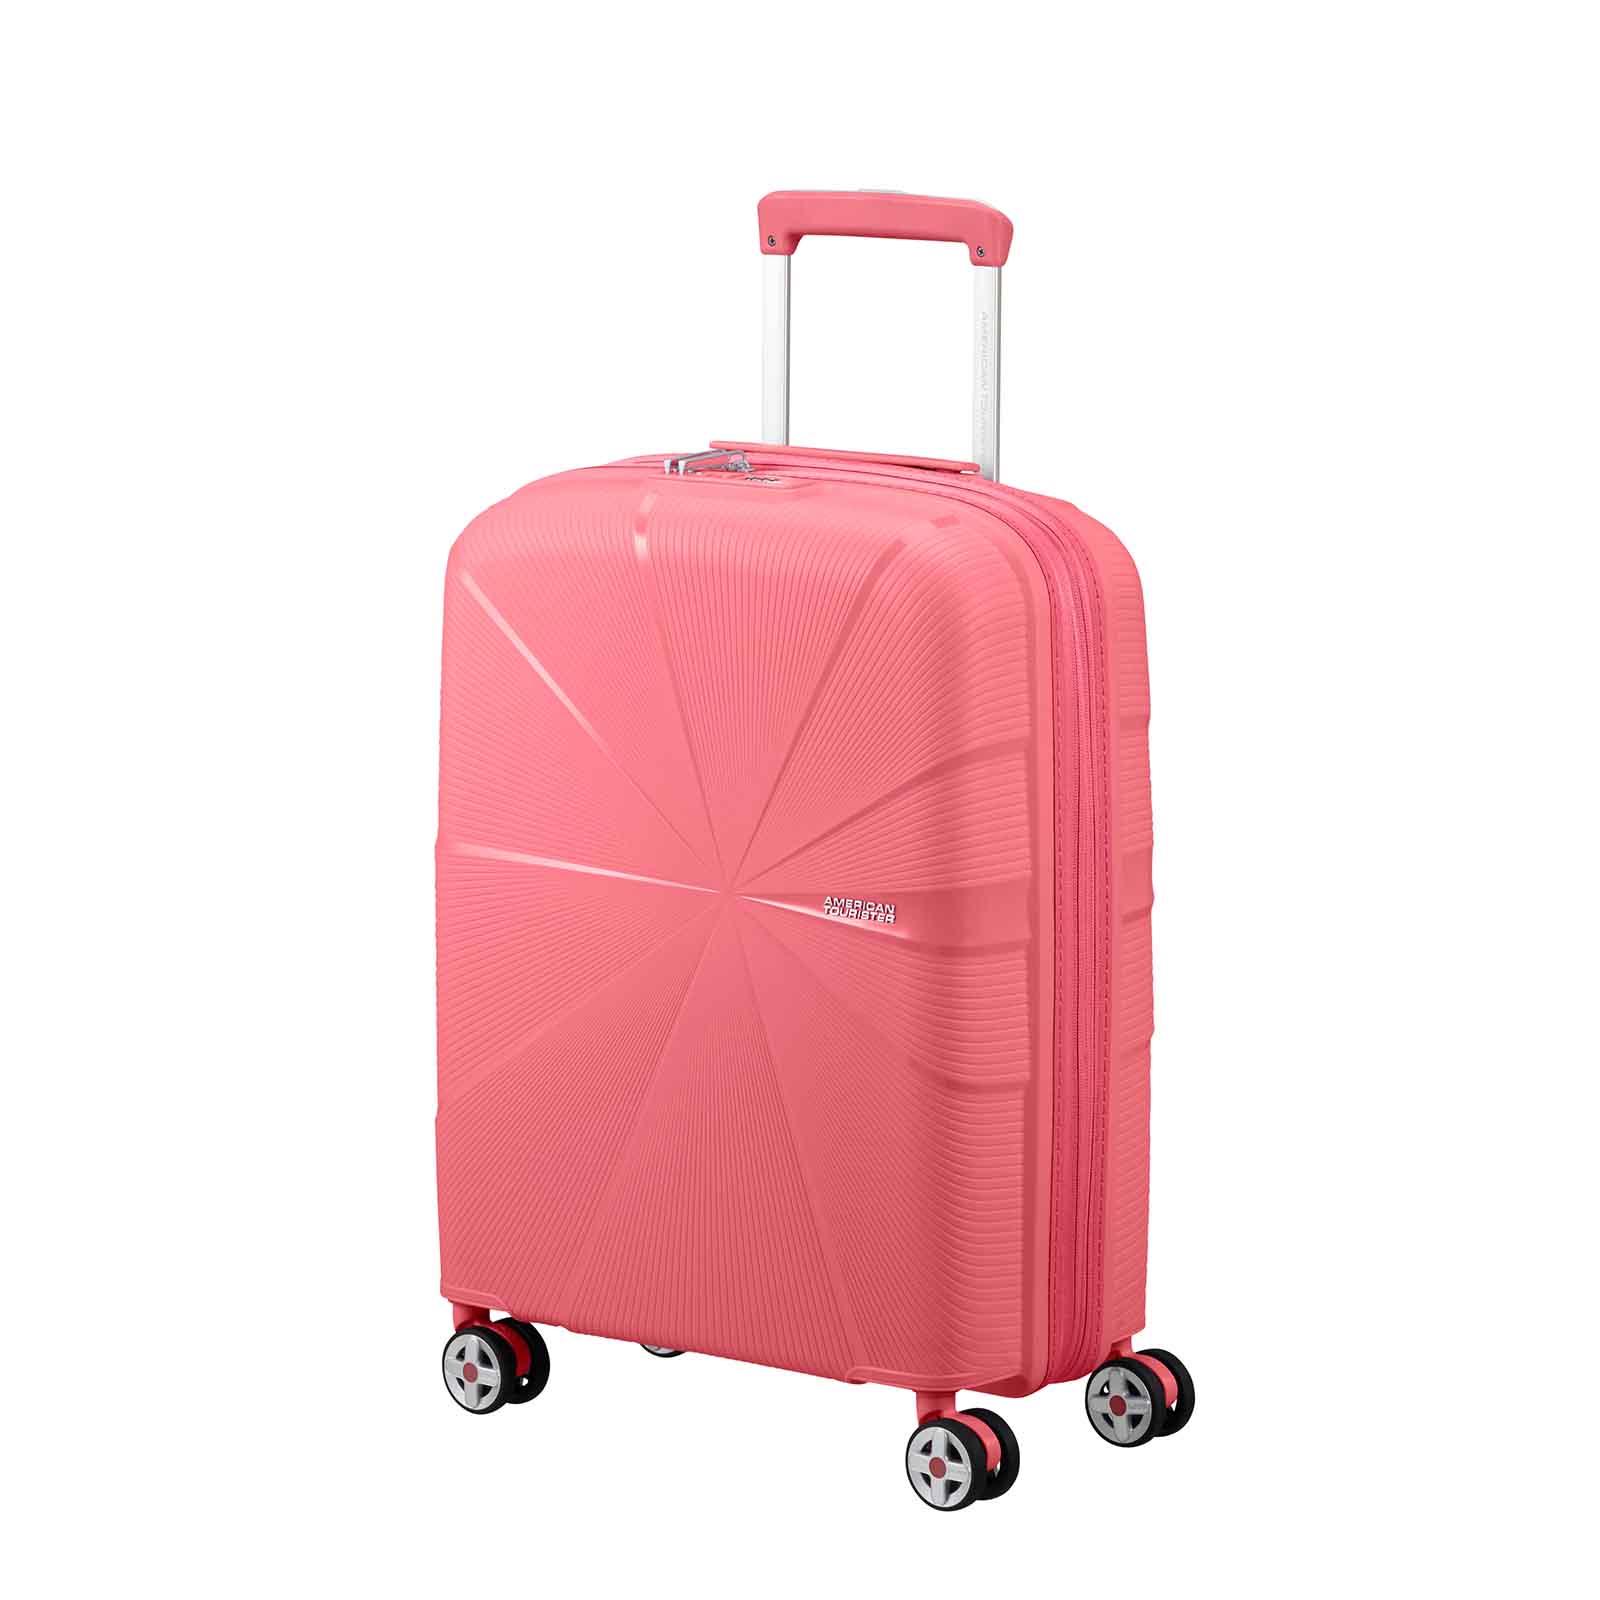 American-Tourister-Starvibe-55cm-Carry-On-Suitcase-Coral-Angle